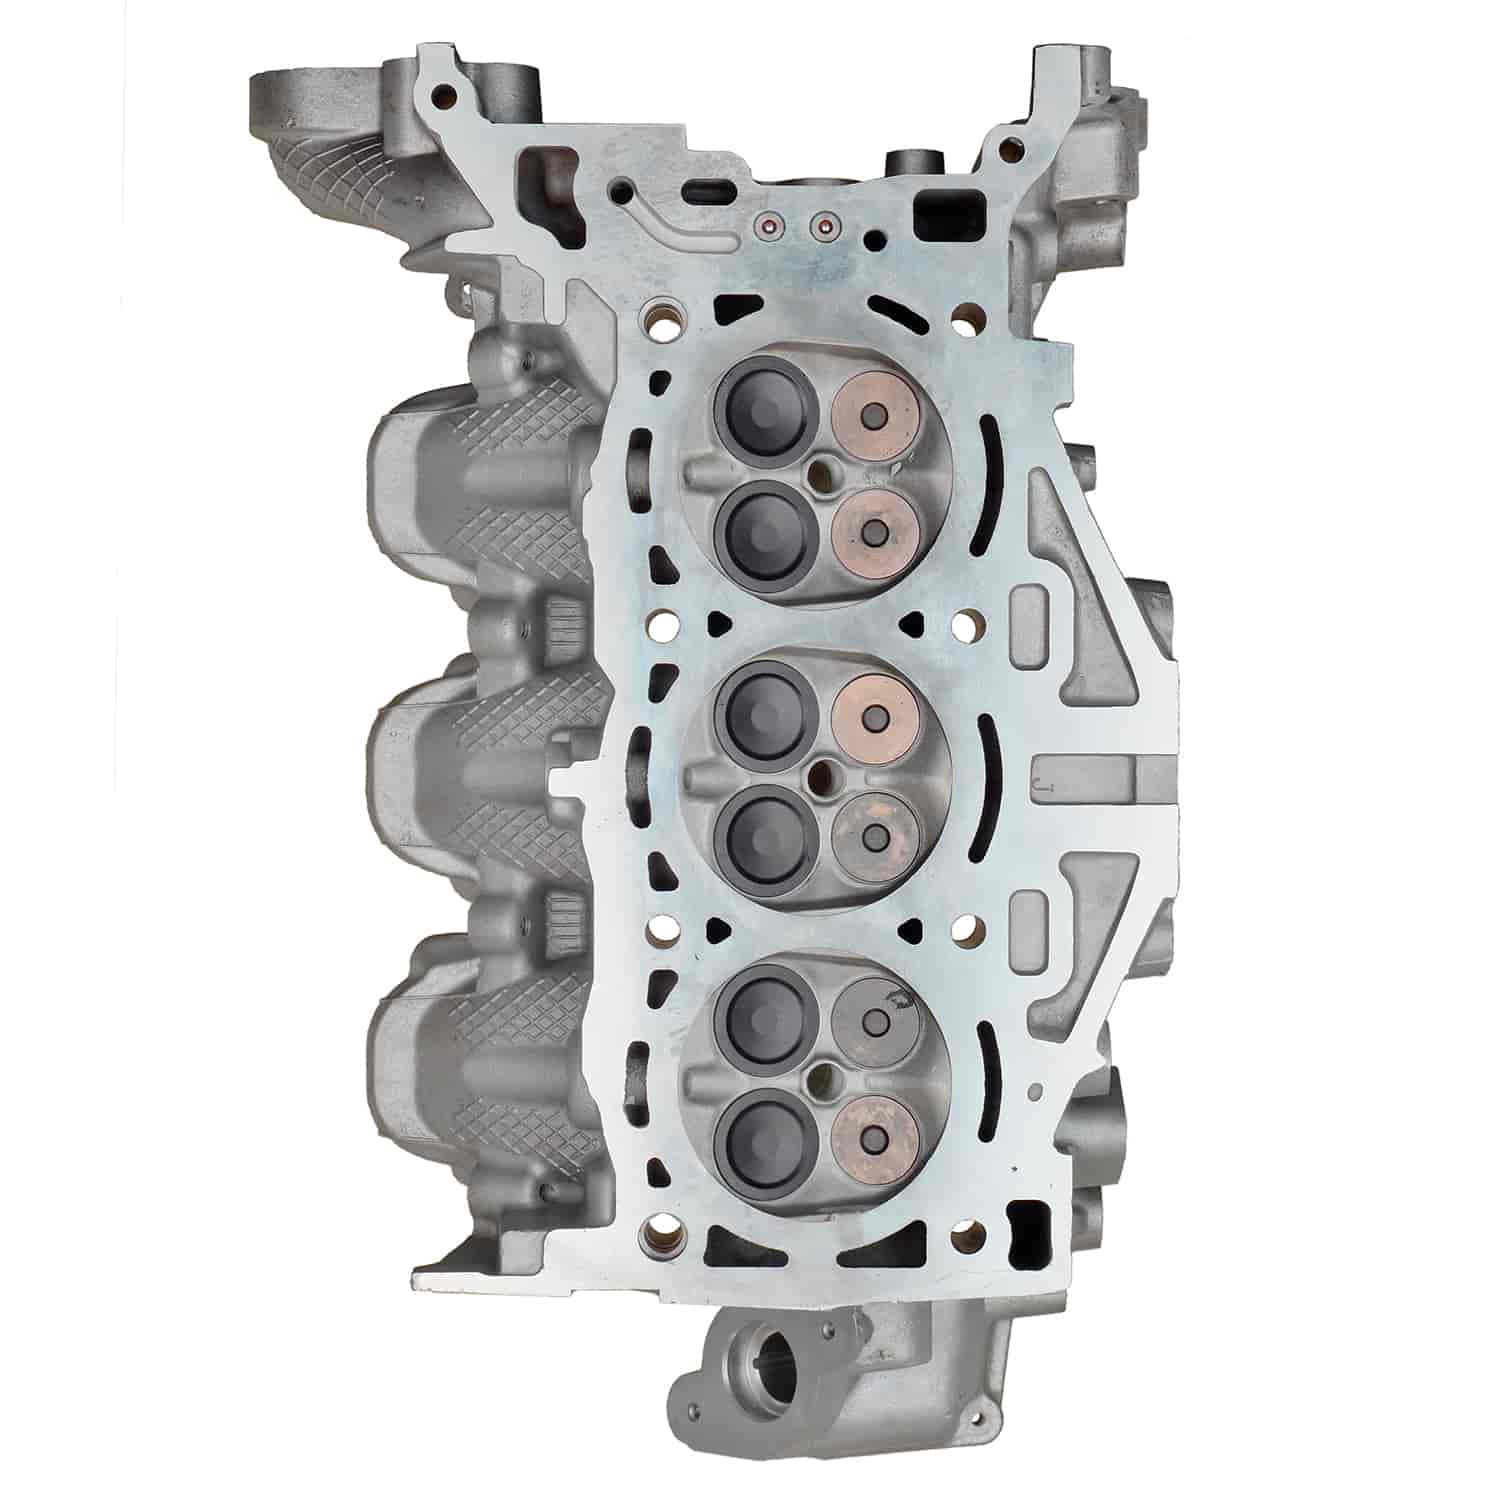 Remanufactured Cylinder Head for 2012-2014 Chevy/Cadillac/Buick